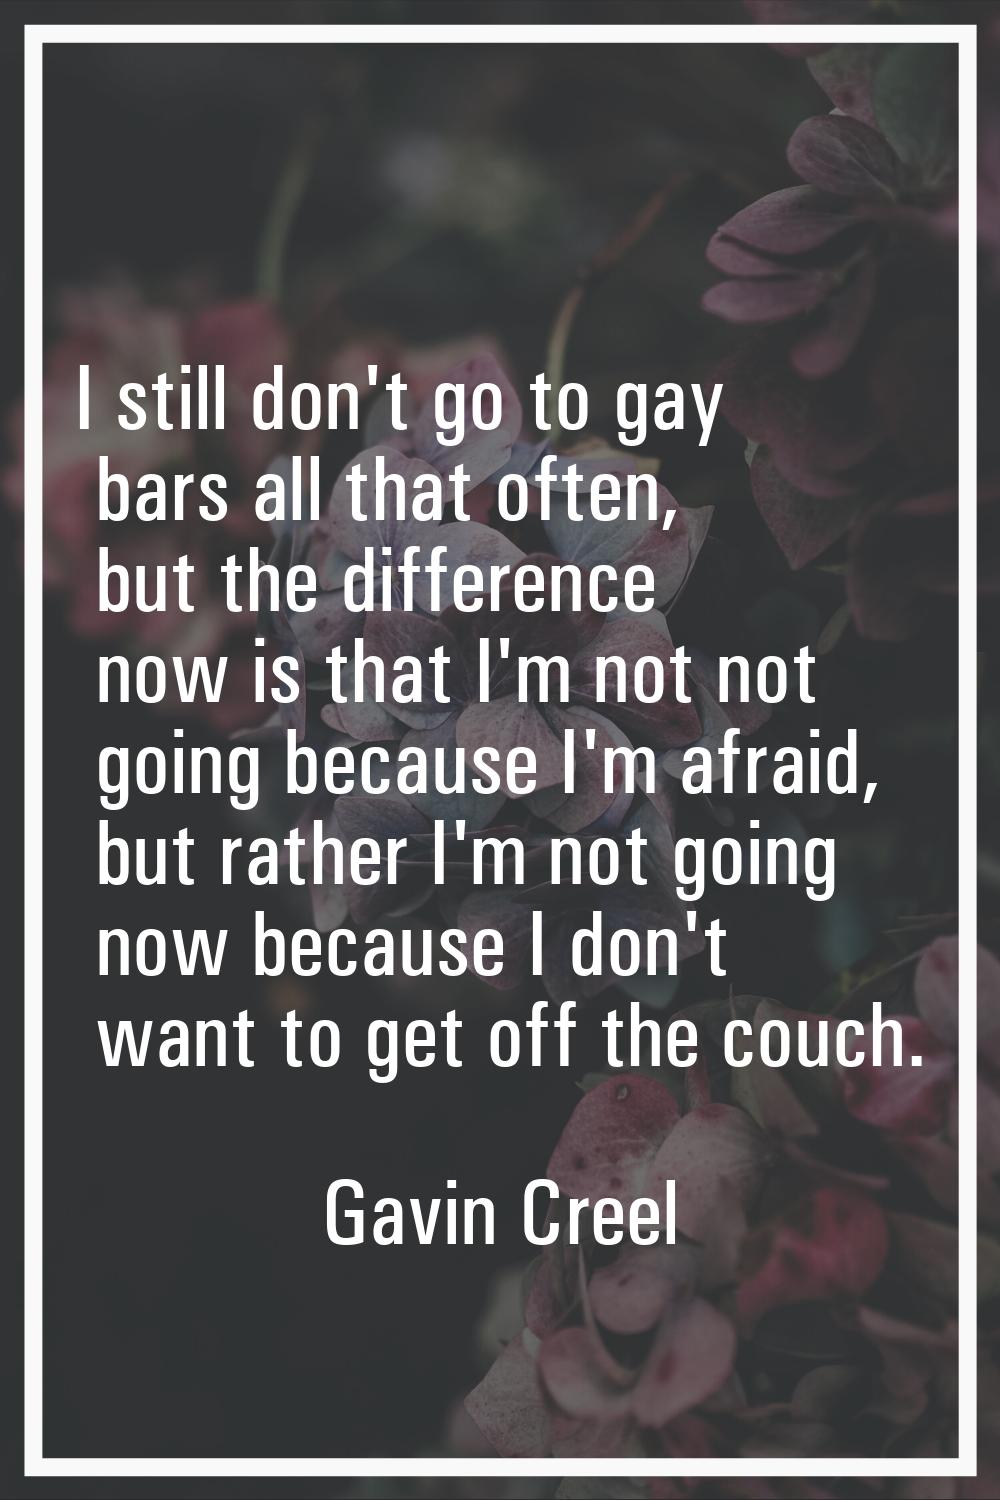 I still don't go to gay bars all that often, but the difference now is that I'm not not going becau